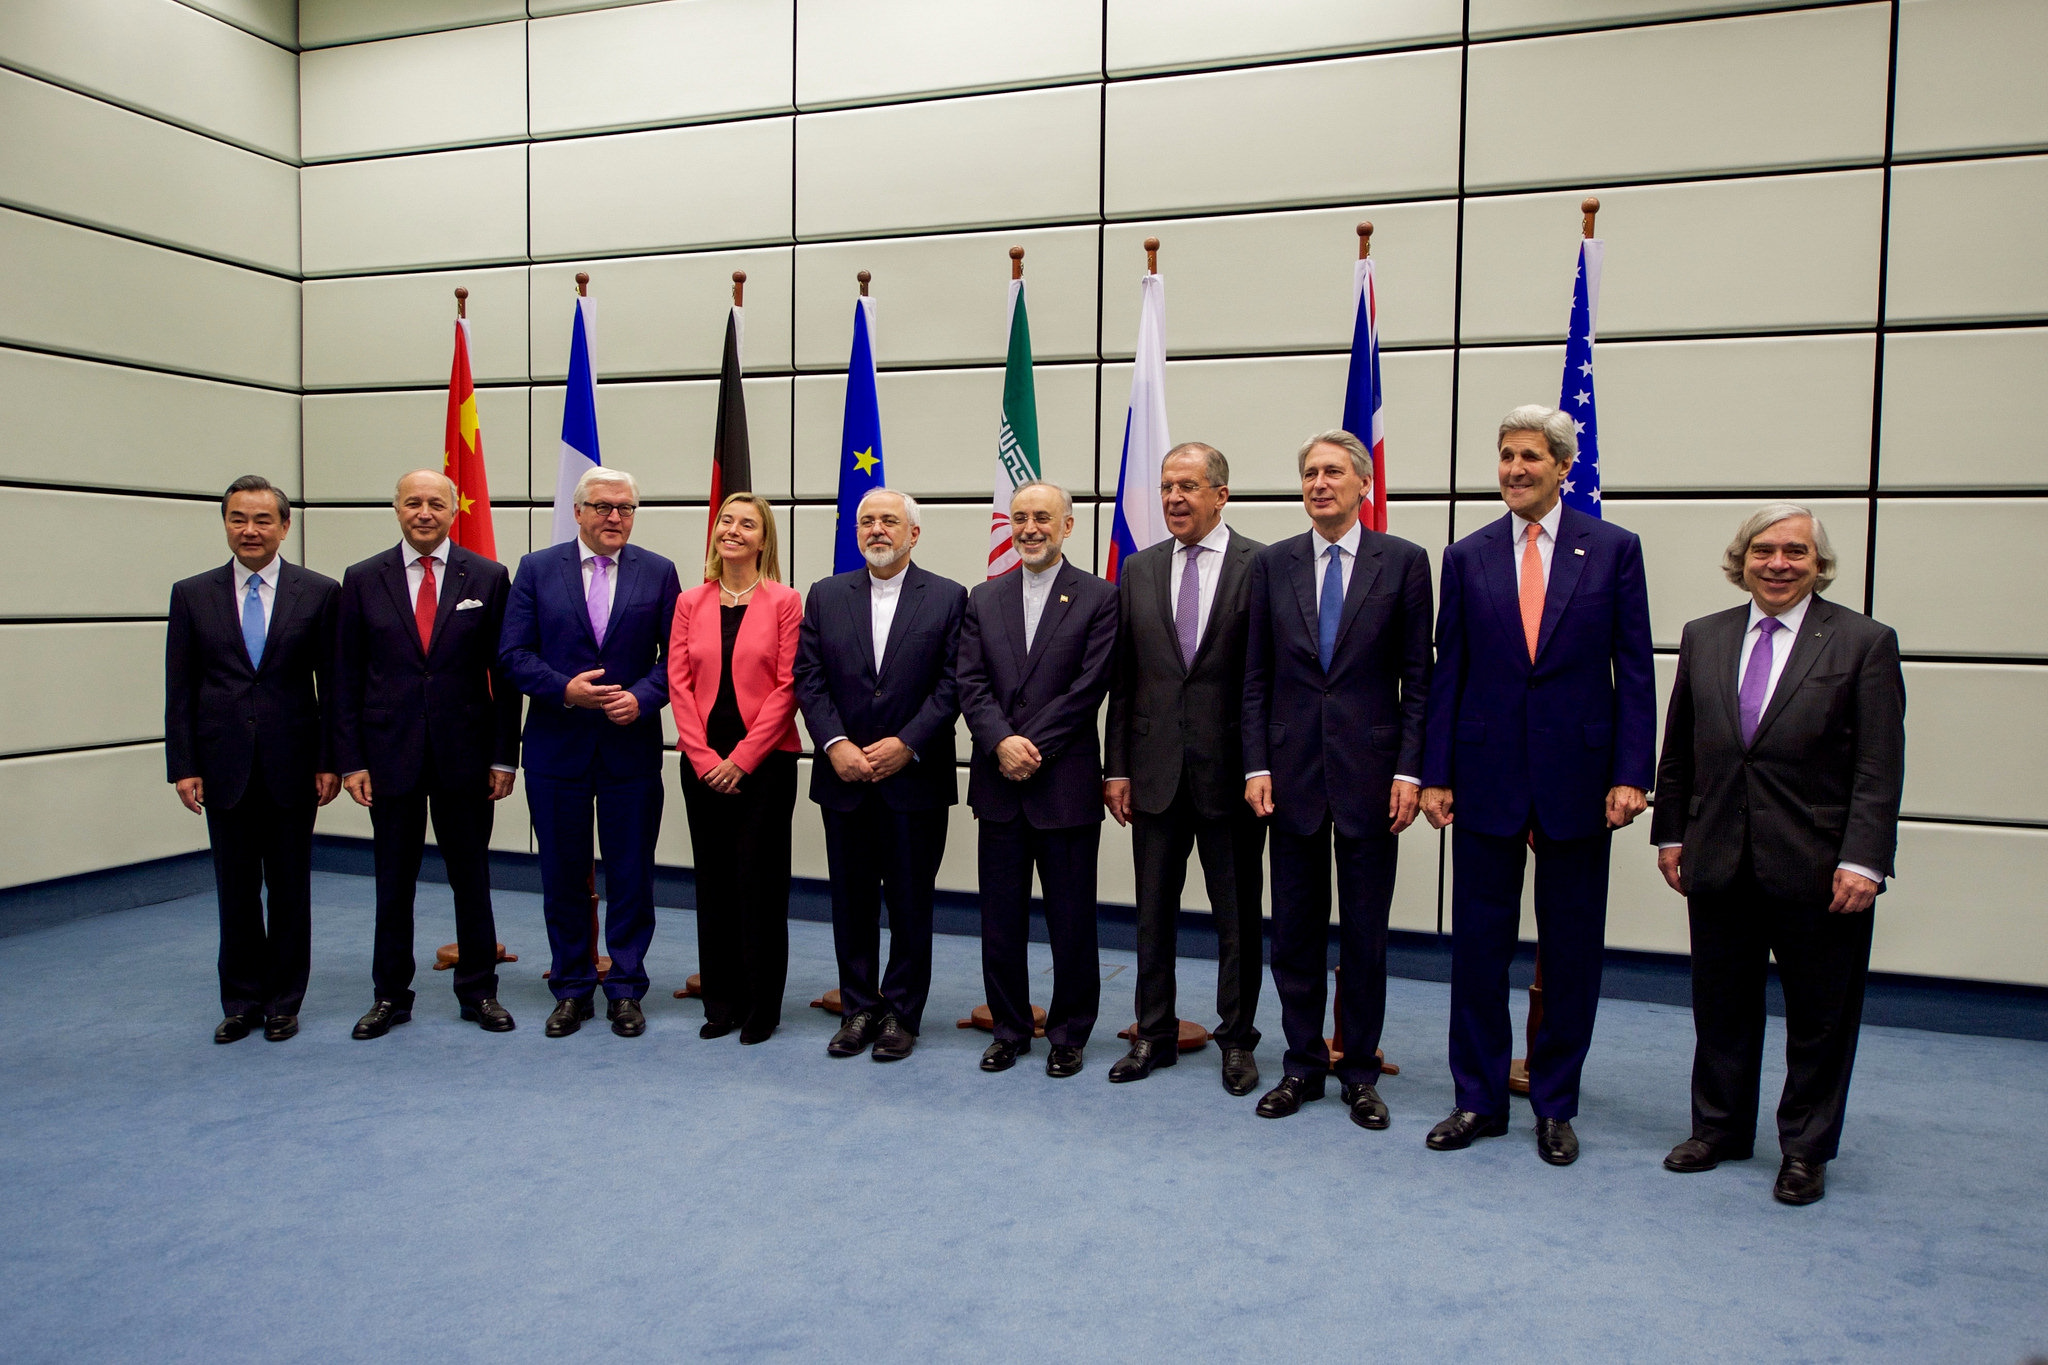 Secretary Kerry Poses for a Group Photo With E.U., P5+1, and Iranian Officials Before Final Plenary of Iran Nuclear Negotiations in Austria - USDOS Photo (July 14, 2015)